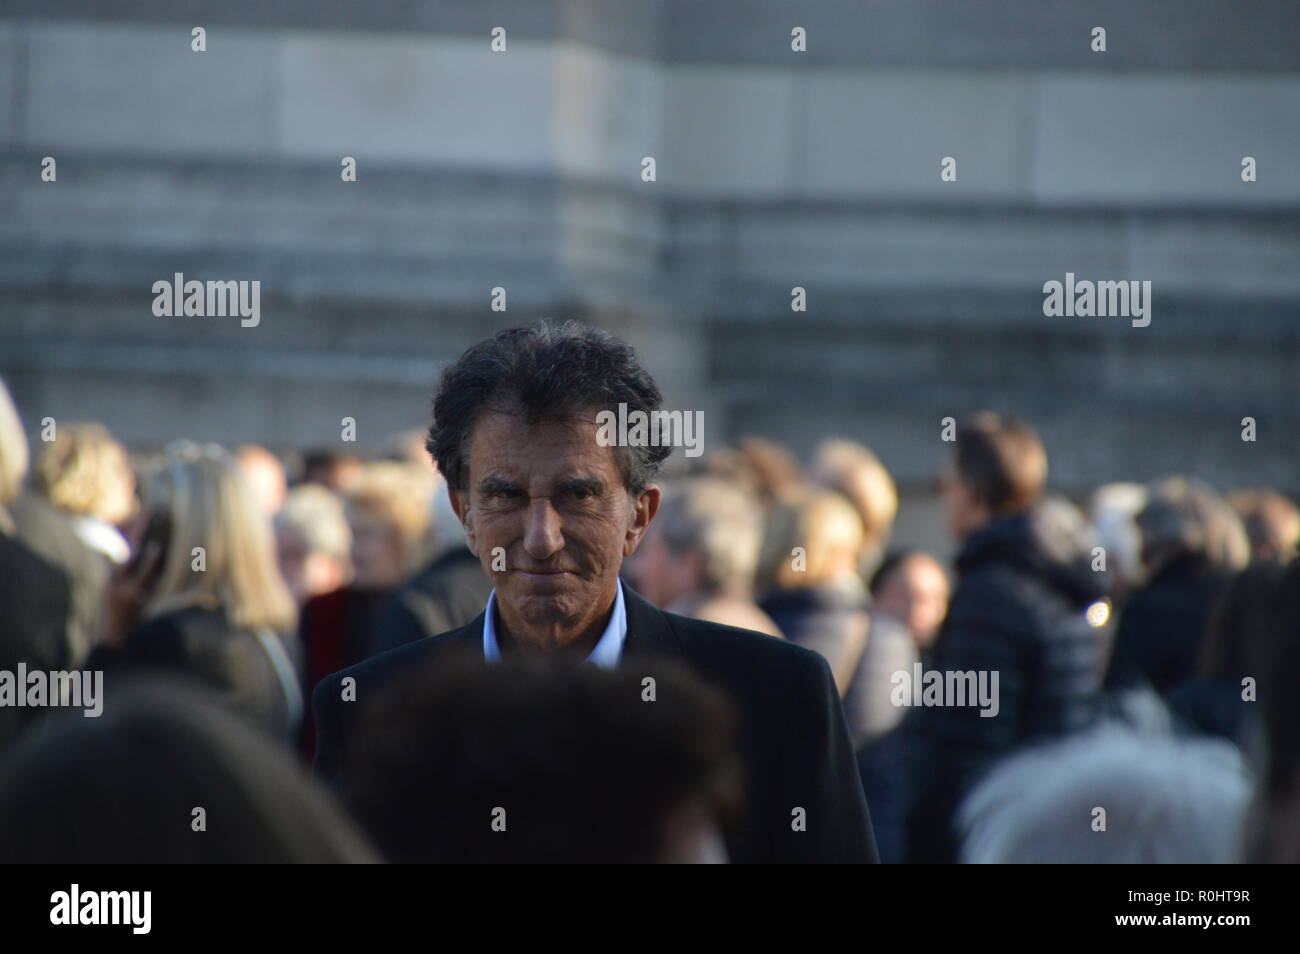 Paris, France. 5th Nov 2018. Jack Lang, creator of the Techno Parade and former French Minister of the Culture). French celebrities attend the ceremony for the death of Philippe GILDAS, french TV animator. Crematorium of the Cemetery of the Pere Lachaise, Paris, France. 5 november 2018. 13h30.  ALPHACIT NEWIM / Alamy Live News Credit: Alphacit NEWIM/Alamy Live News Stock Photo